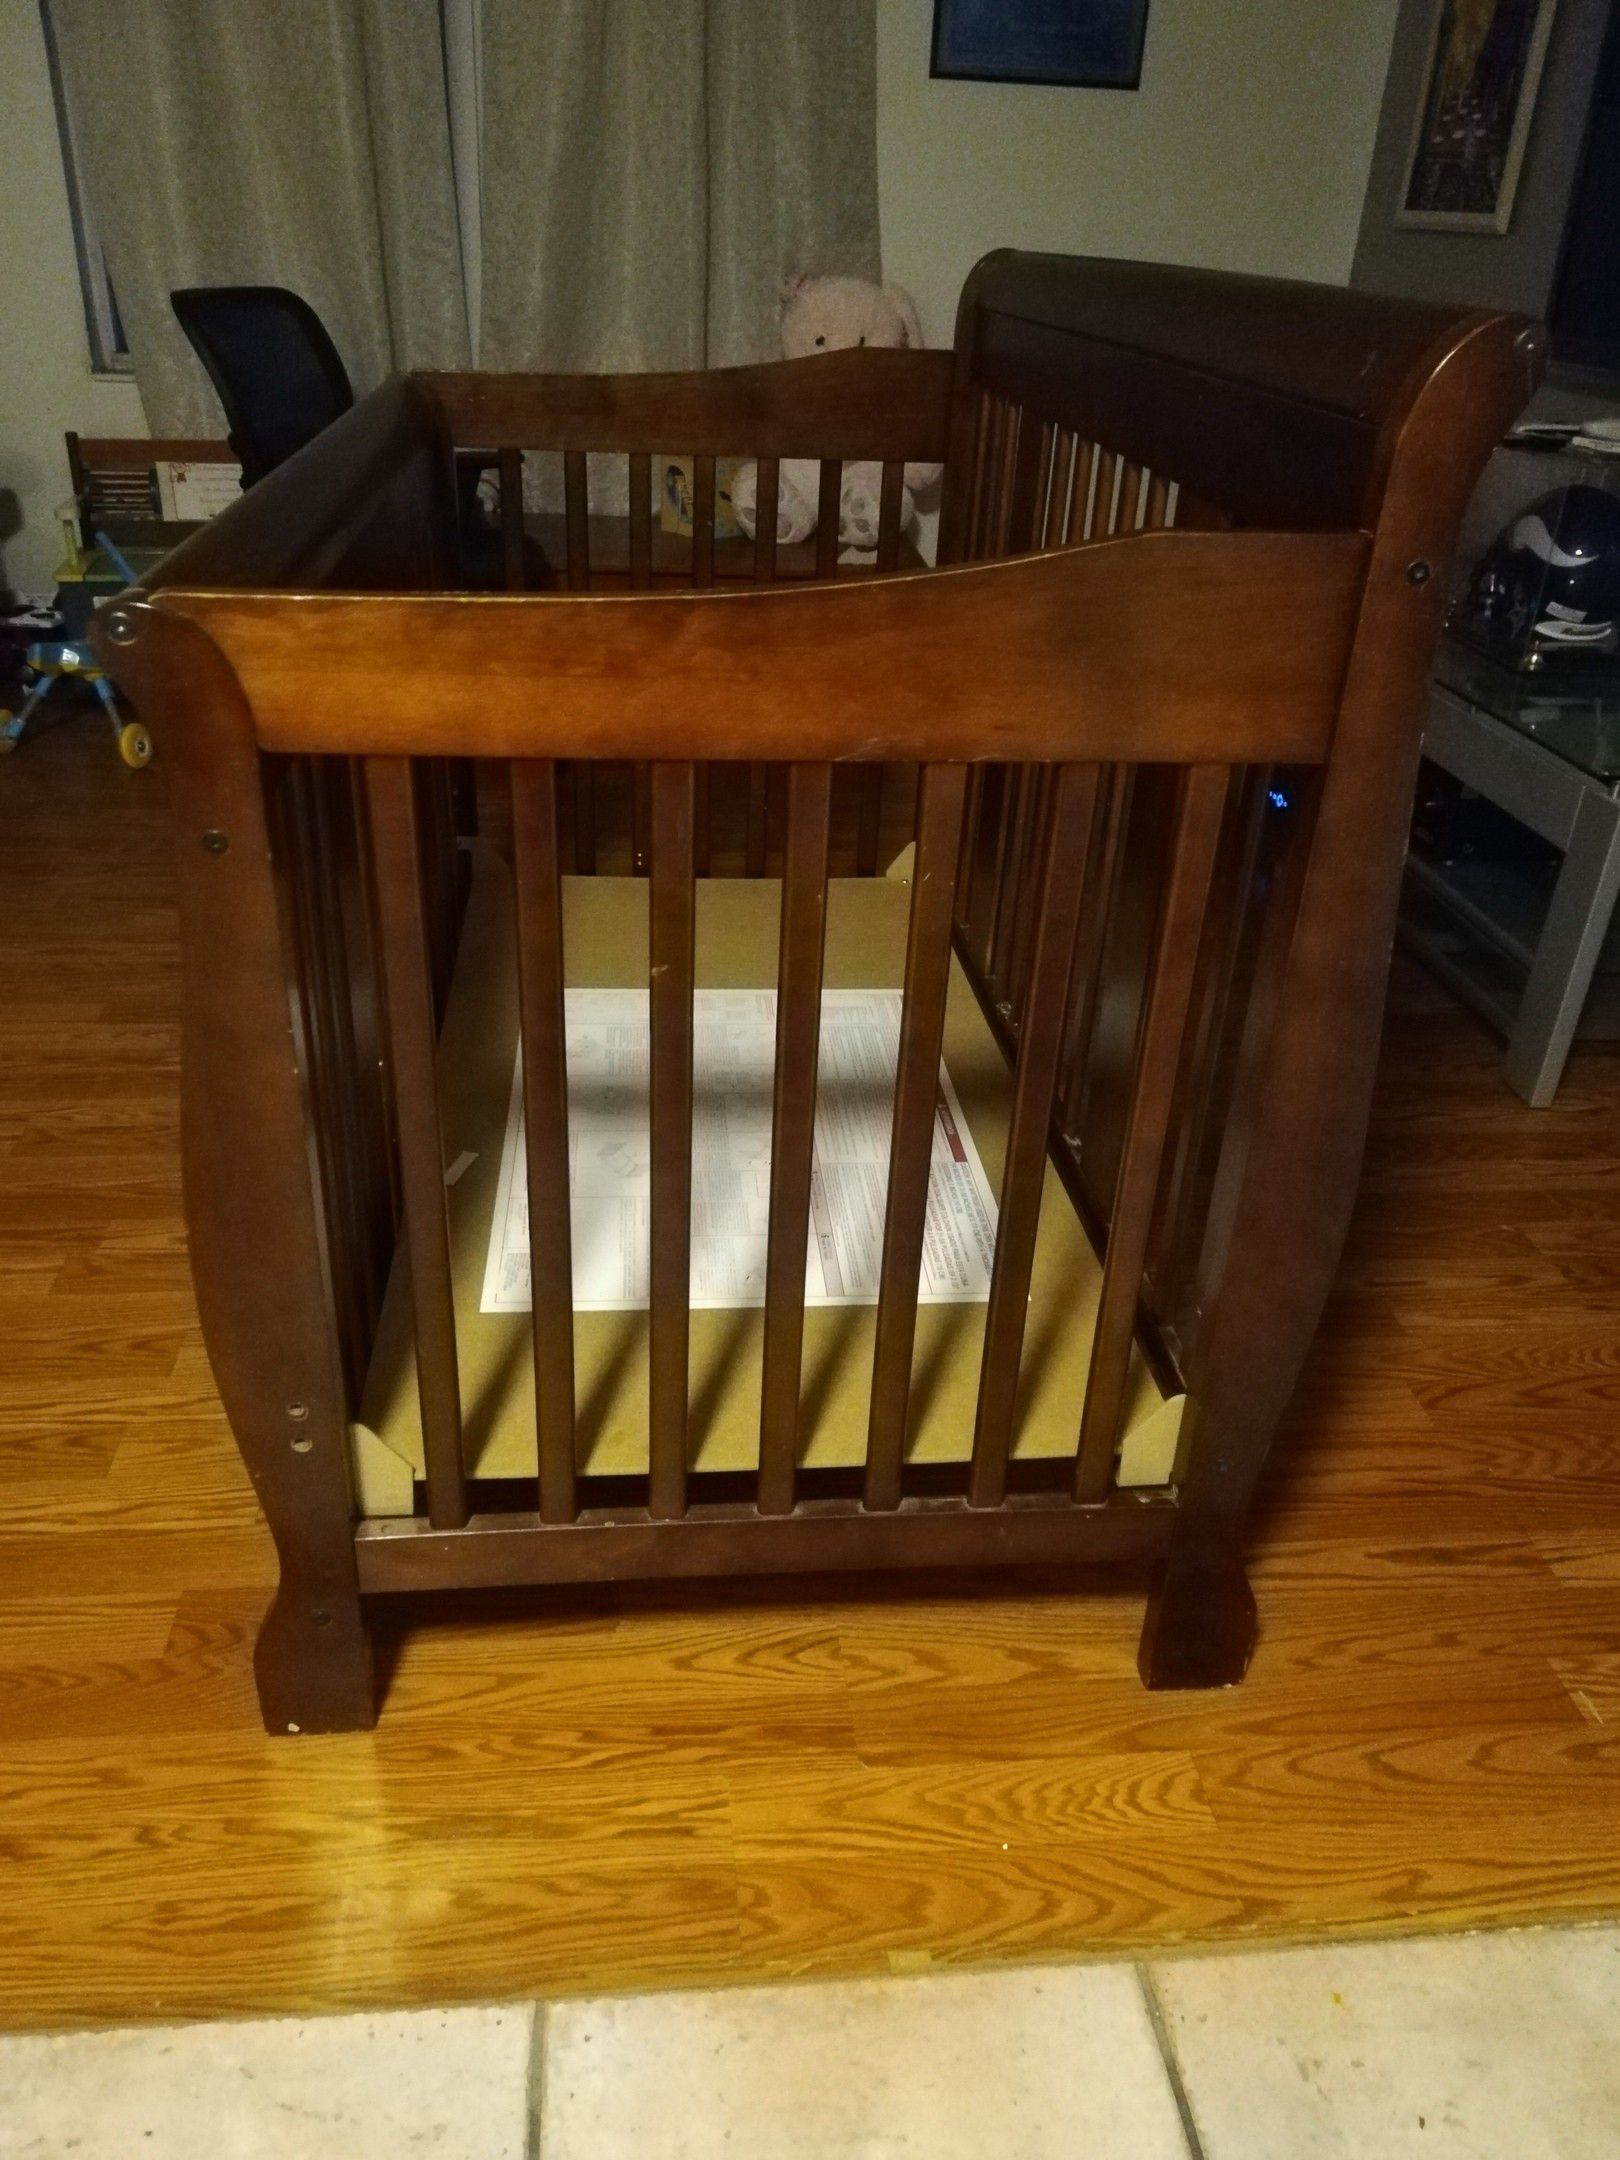 Baby crib used as downstairs crib, so used but little